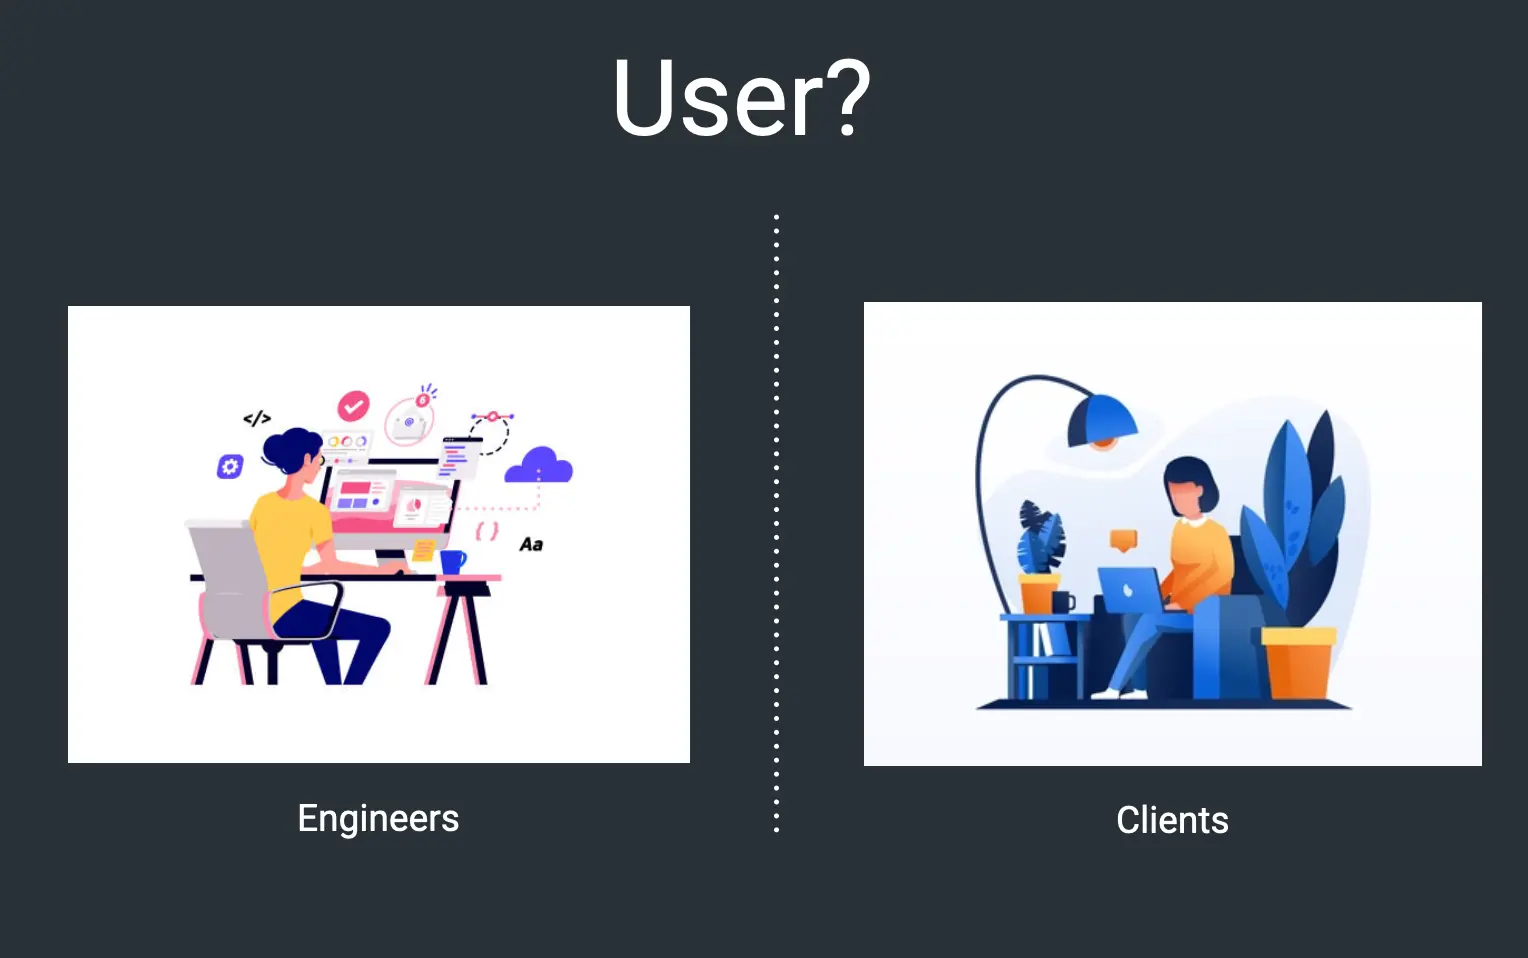 We have two users: engineers and clients